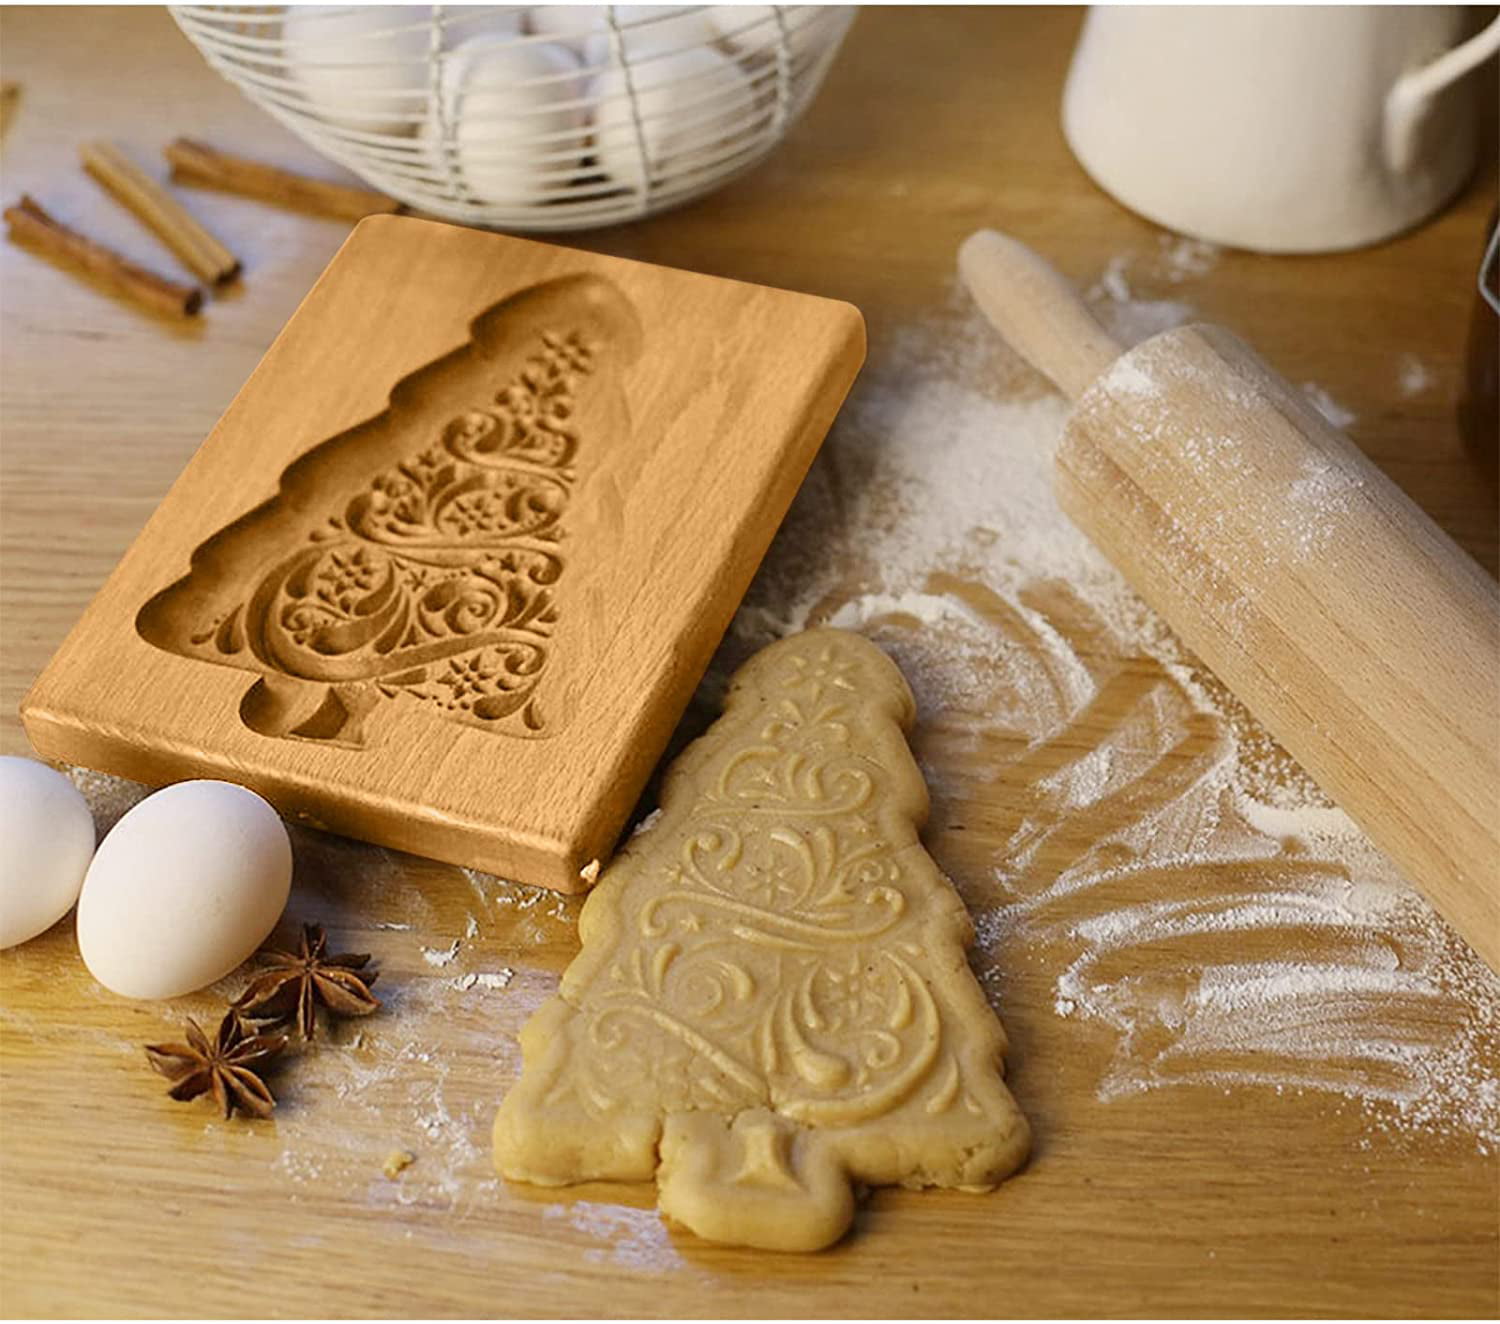 ASRS Christmas Tree Cookie Cutters Mold,Christmas Carved Wooden Mould Press Cookie Mold 3D Wooden Baking Mold for Cookie Stamp Embossing Craft Decorating Baking Tool